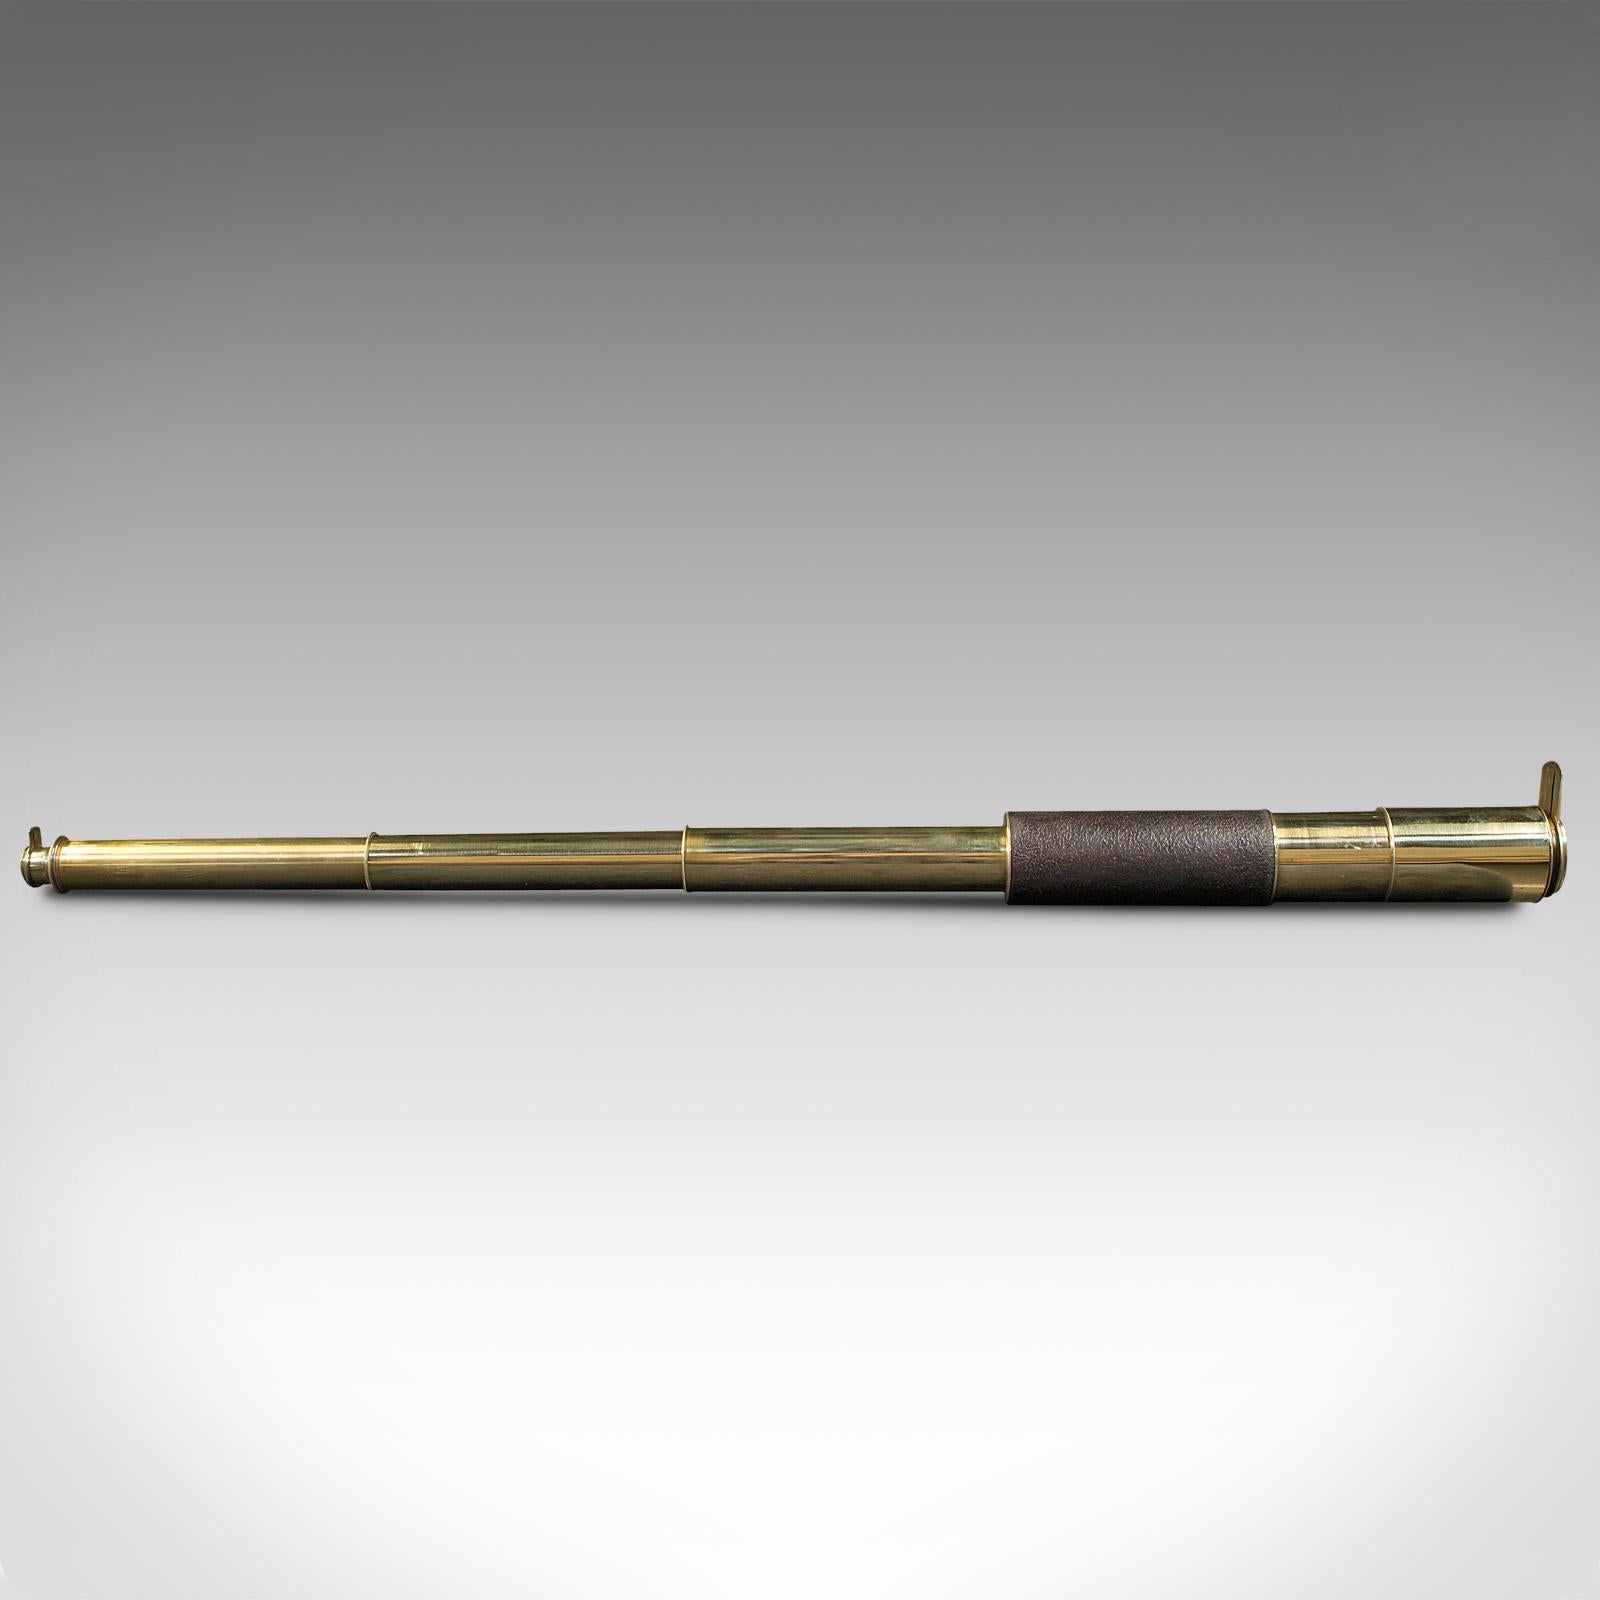 British Antique 3 Draw Telescope, English, Brass, Leather, Terrestrial, Victorian, 1870 For Sale